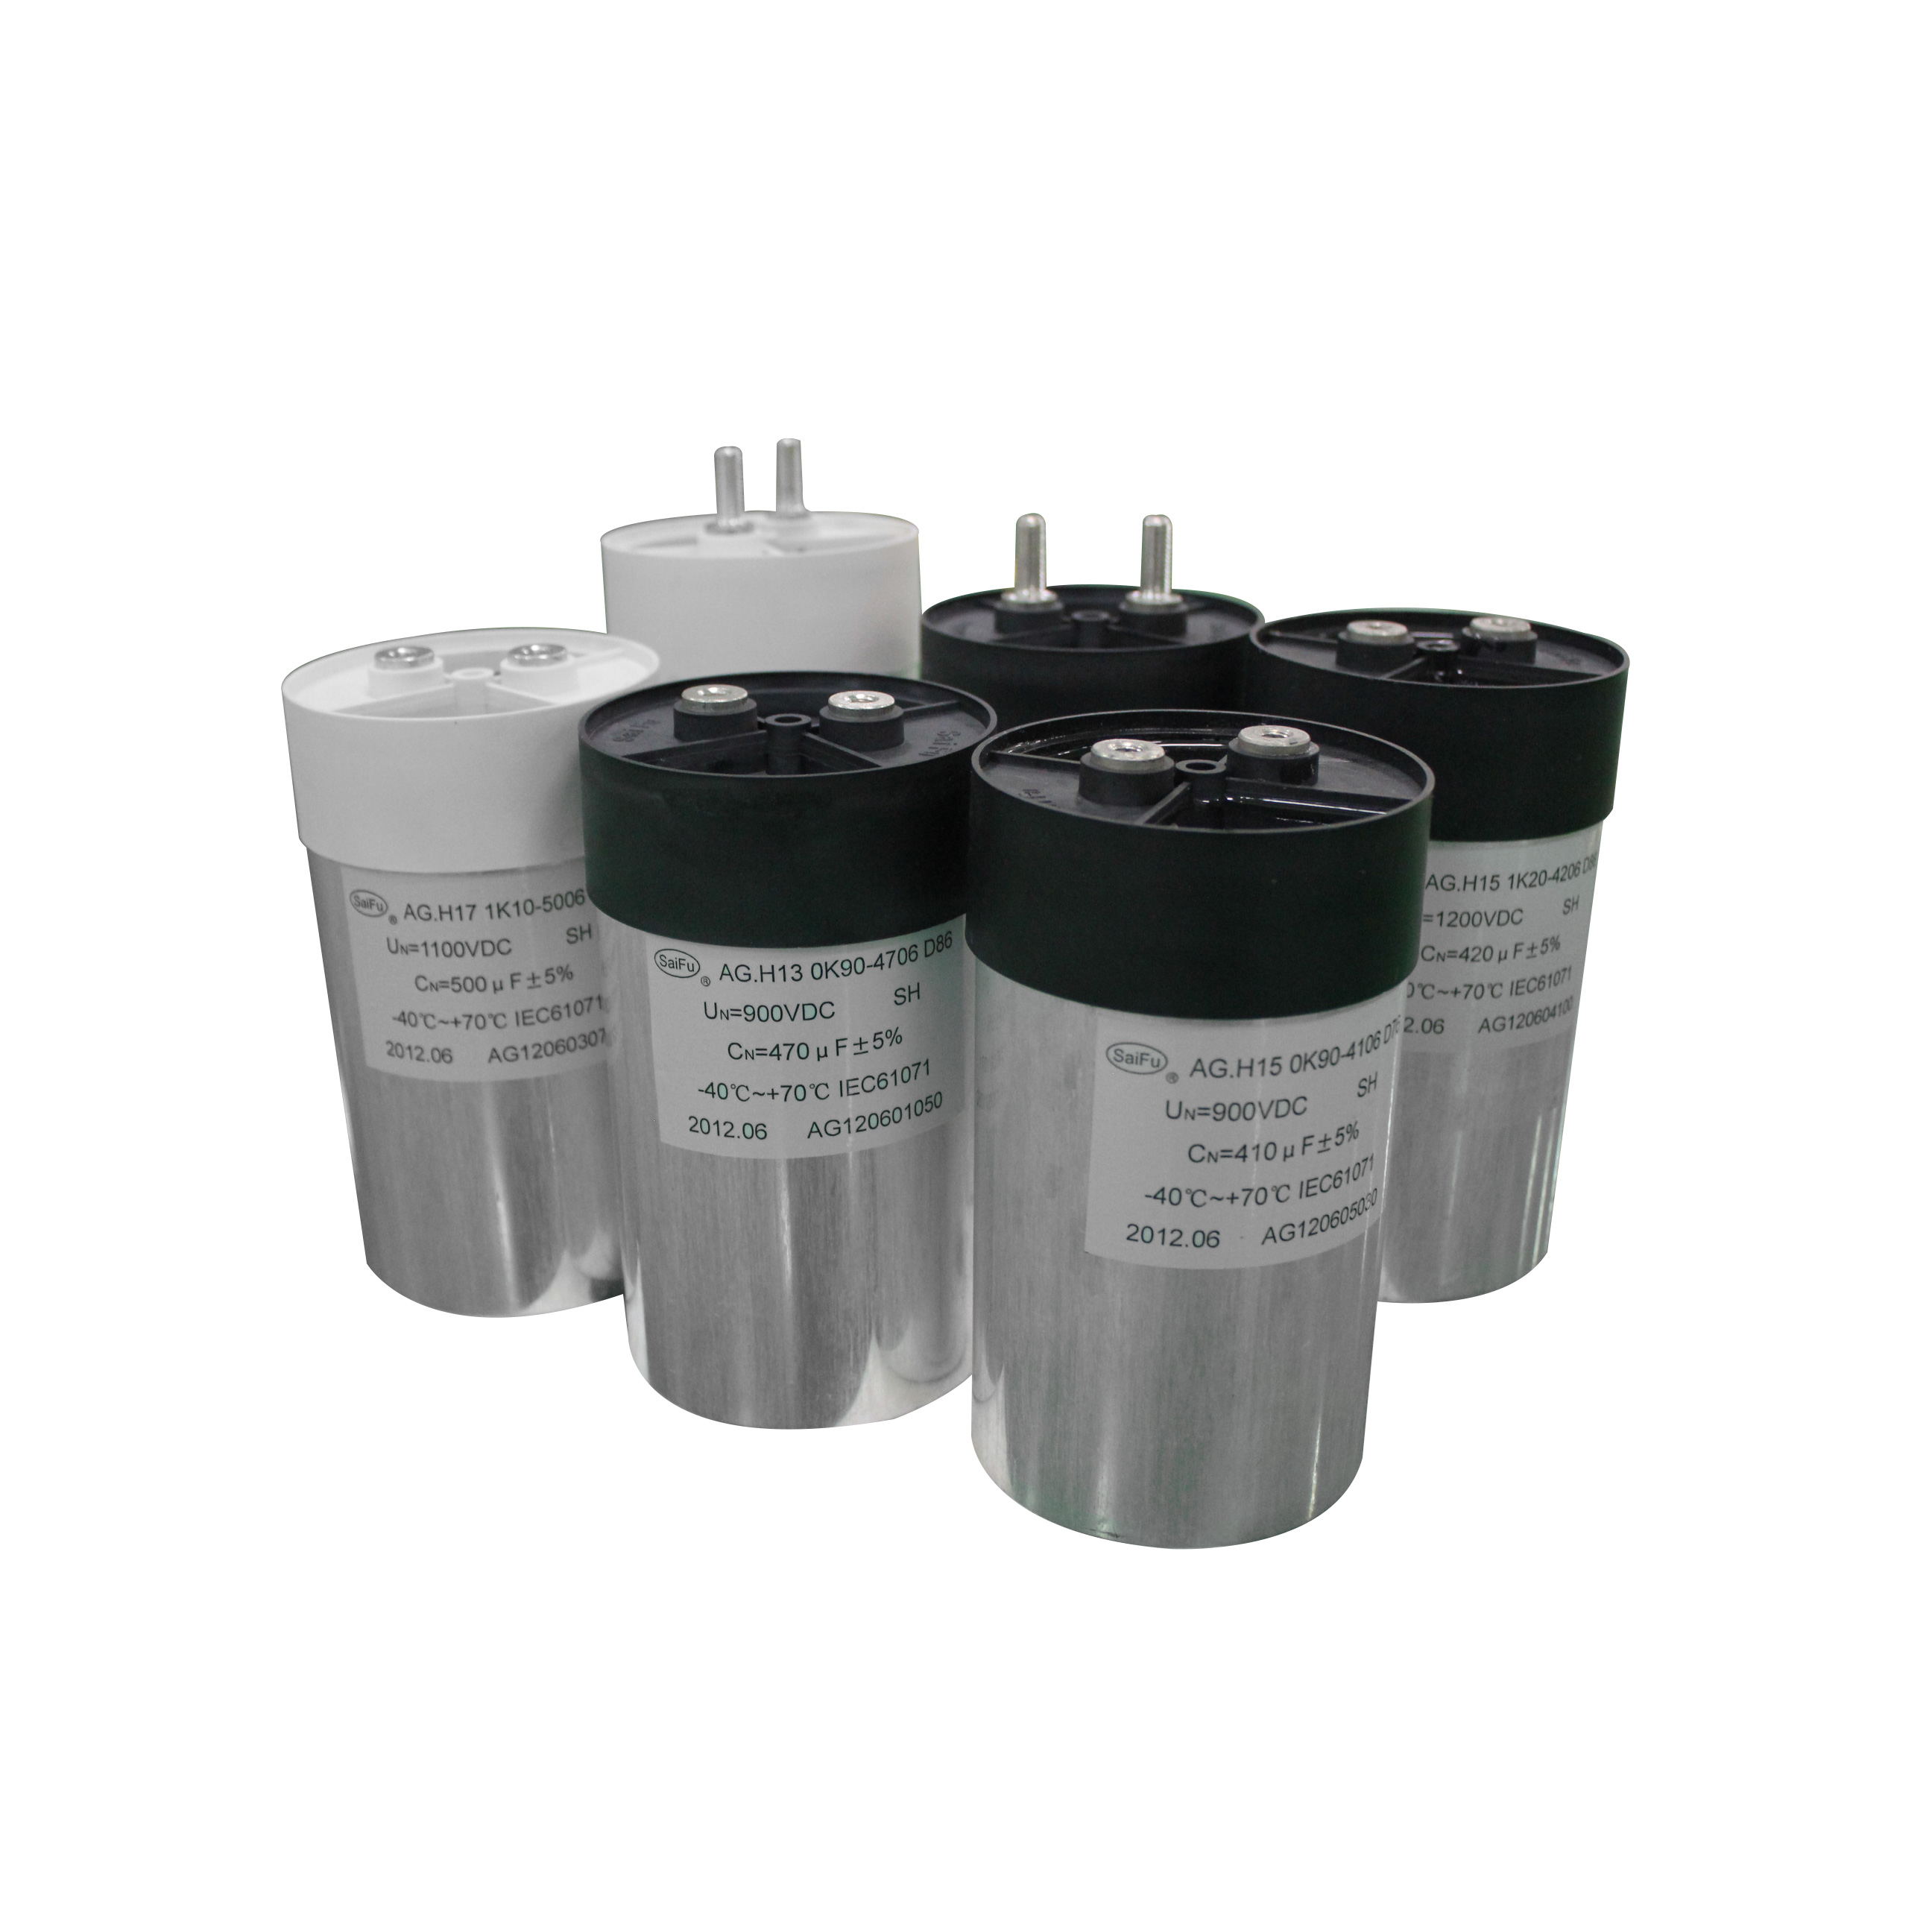 DC Link Capacitor - Buy DC Link Capacitor Product on Anhui Safe